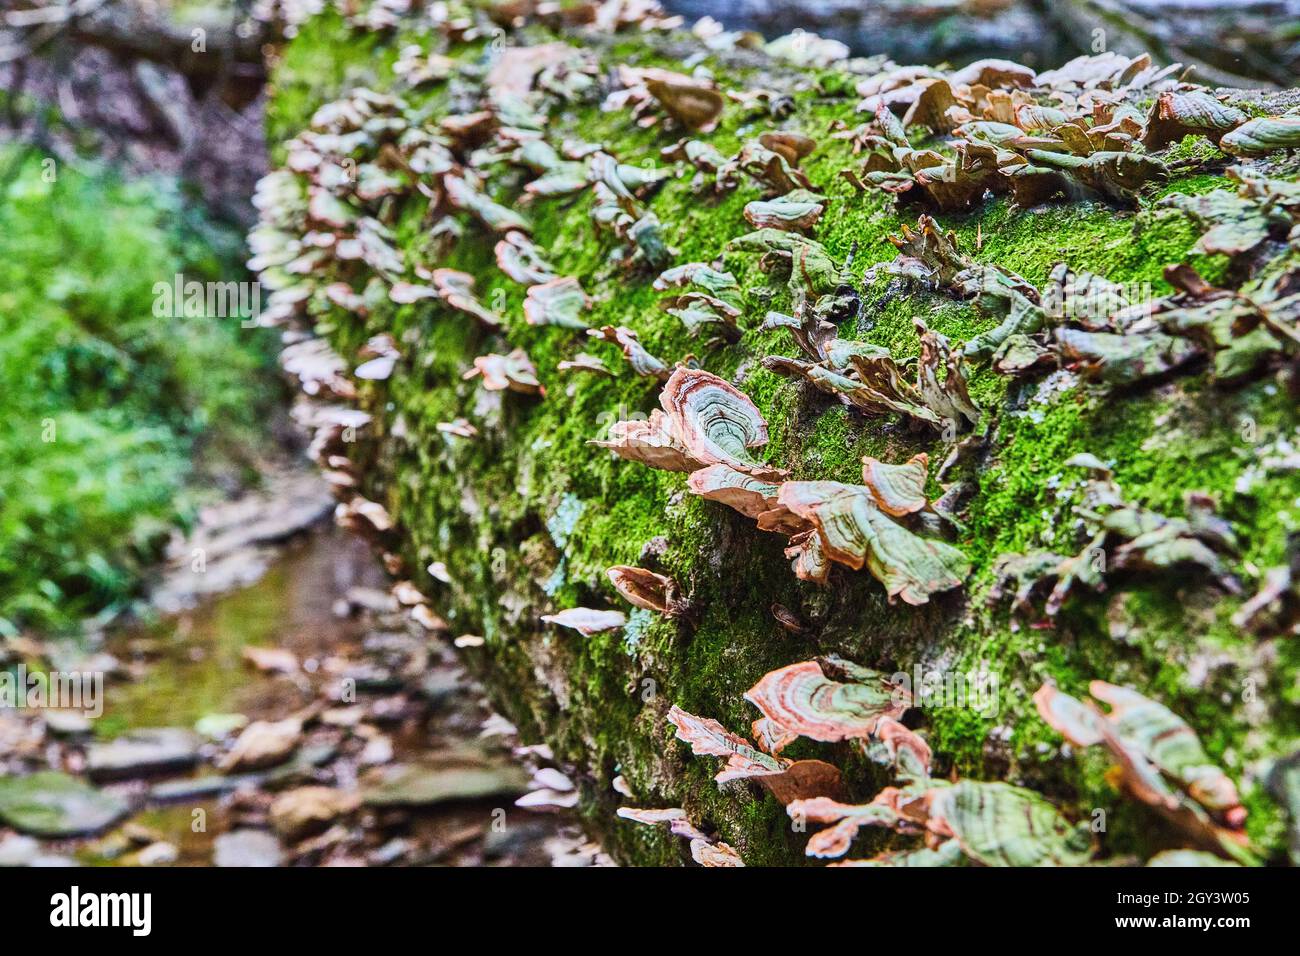 Fallen tree trunk covered in moss and shelf fungus Stock Photo